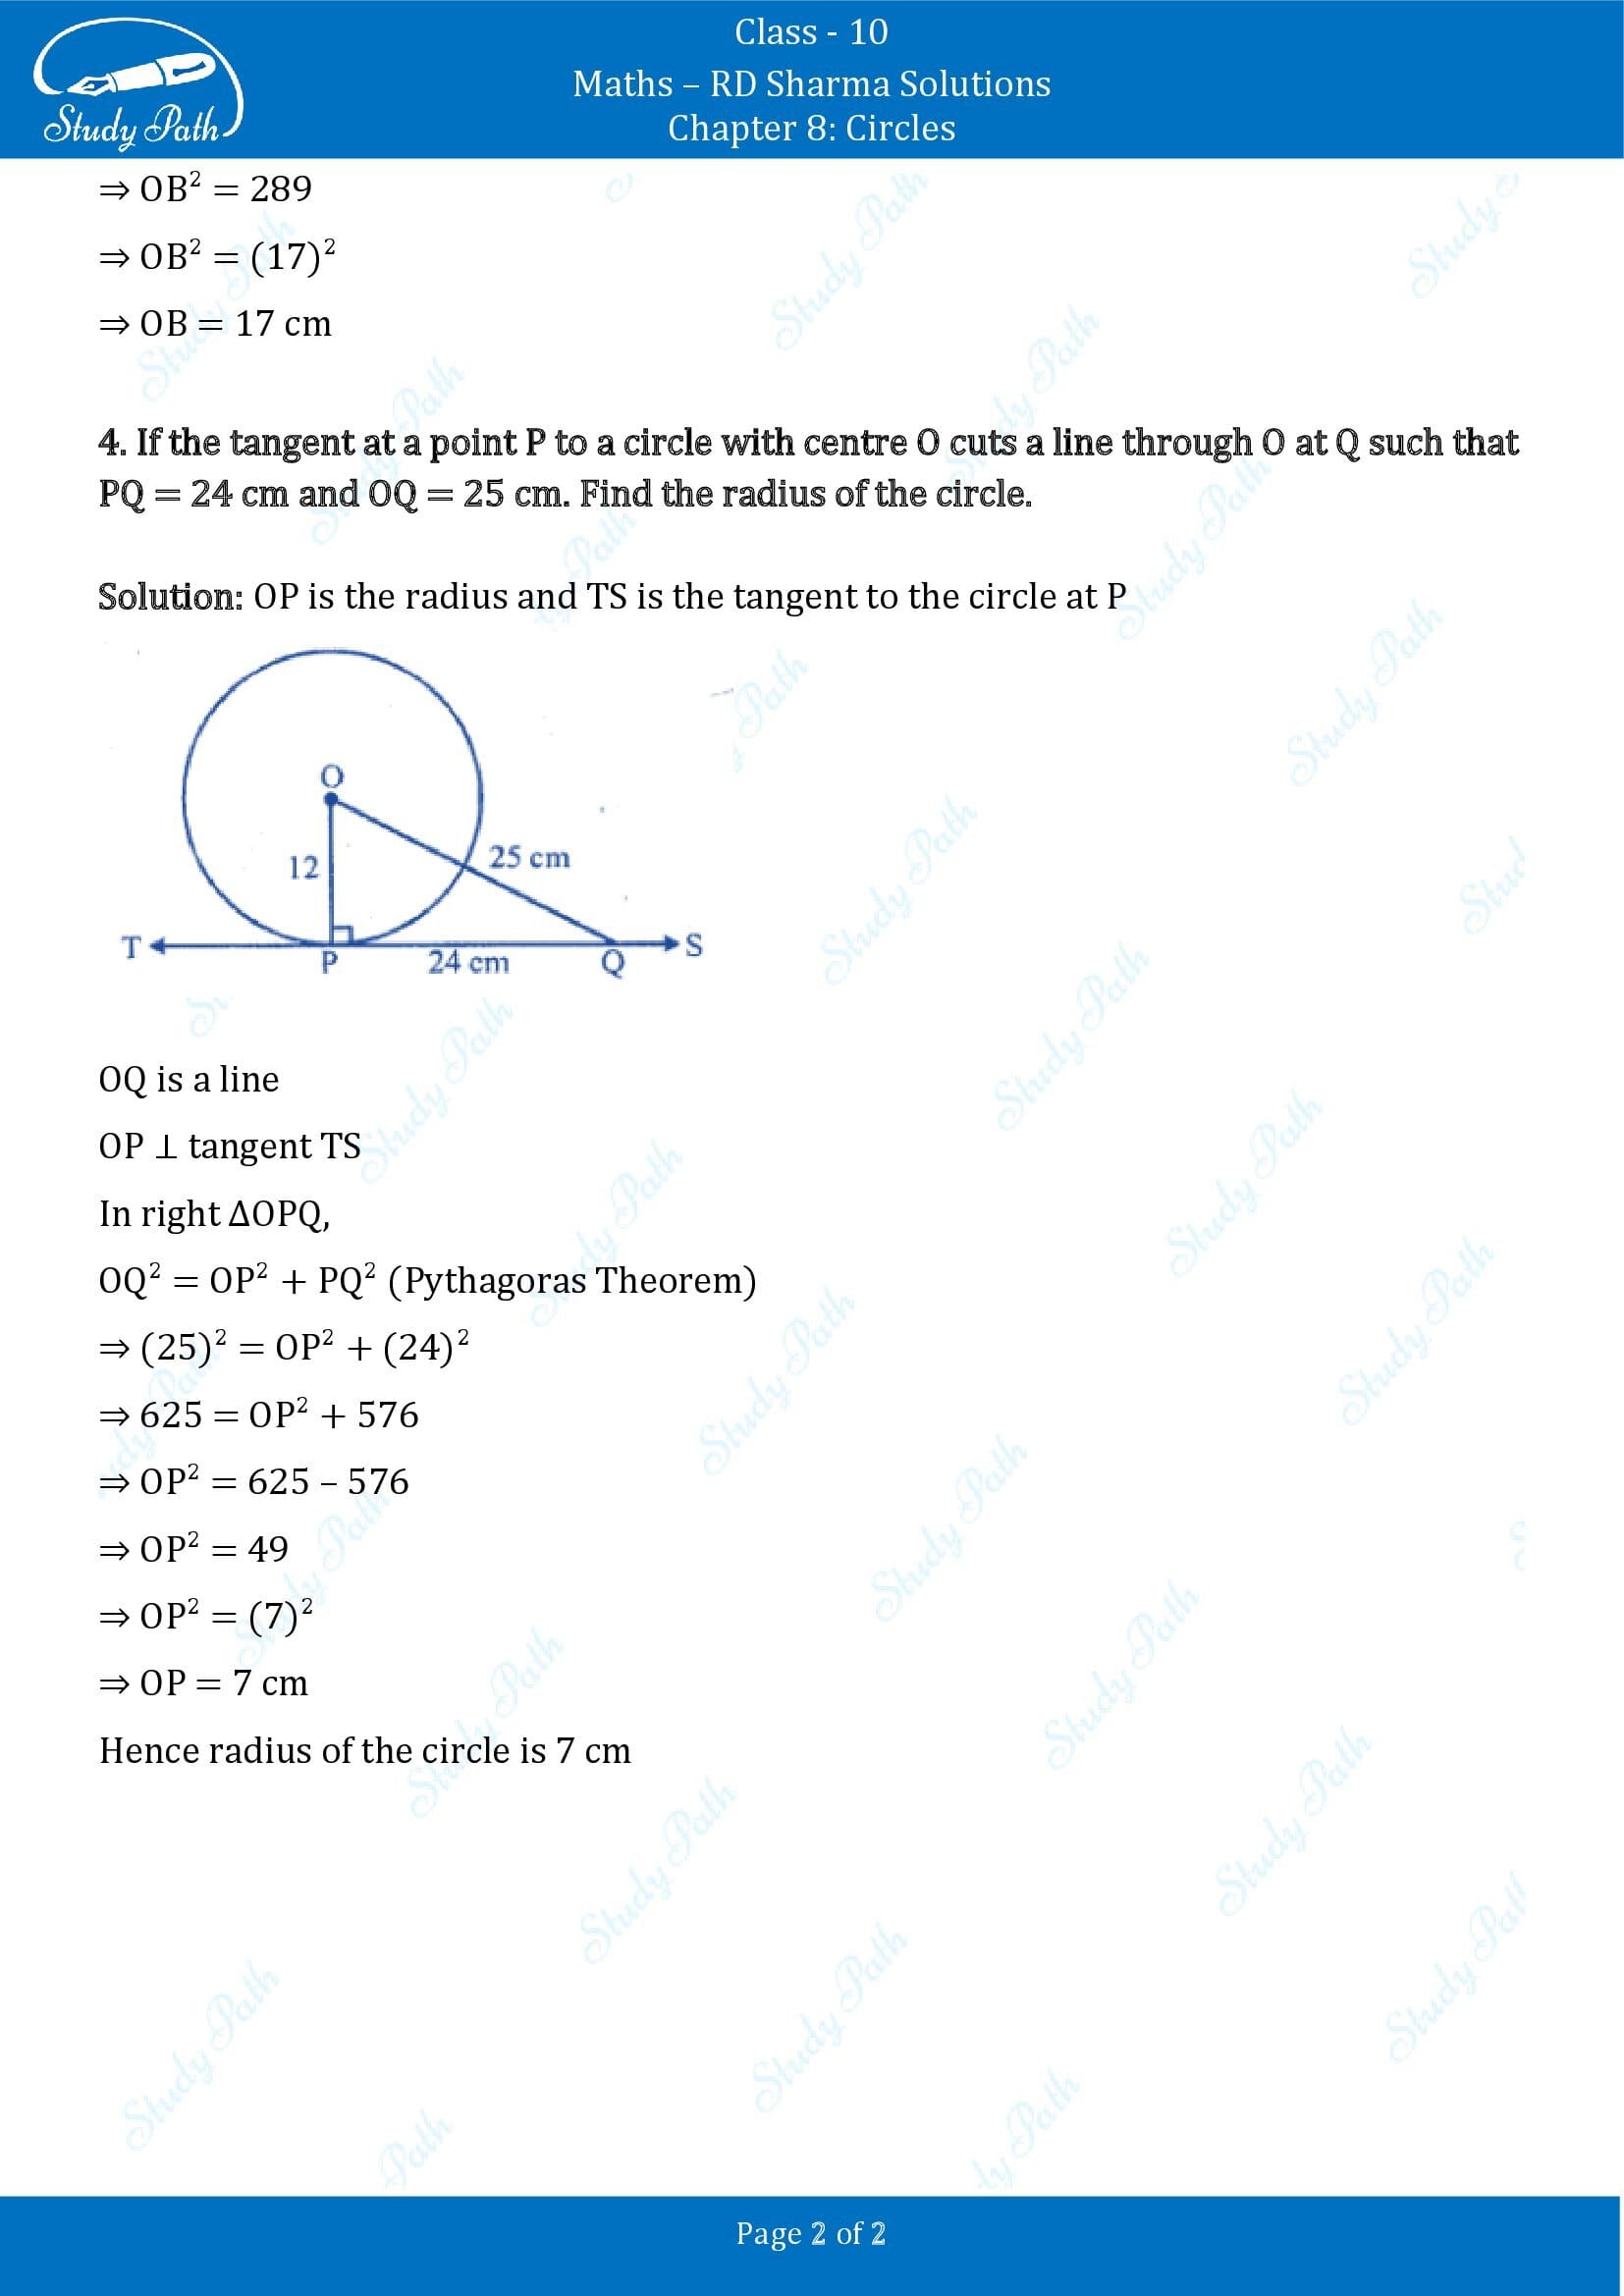 RD Sharma Solutions Class 10 Chapter 8 Circles Exercise 8.1 00002